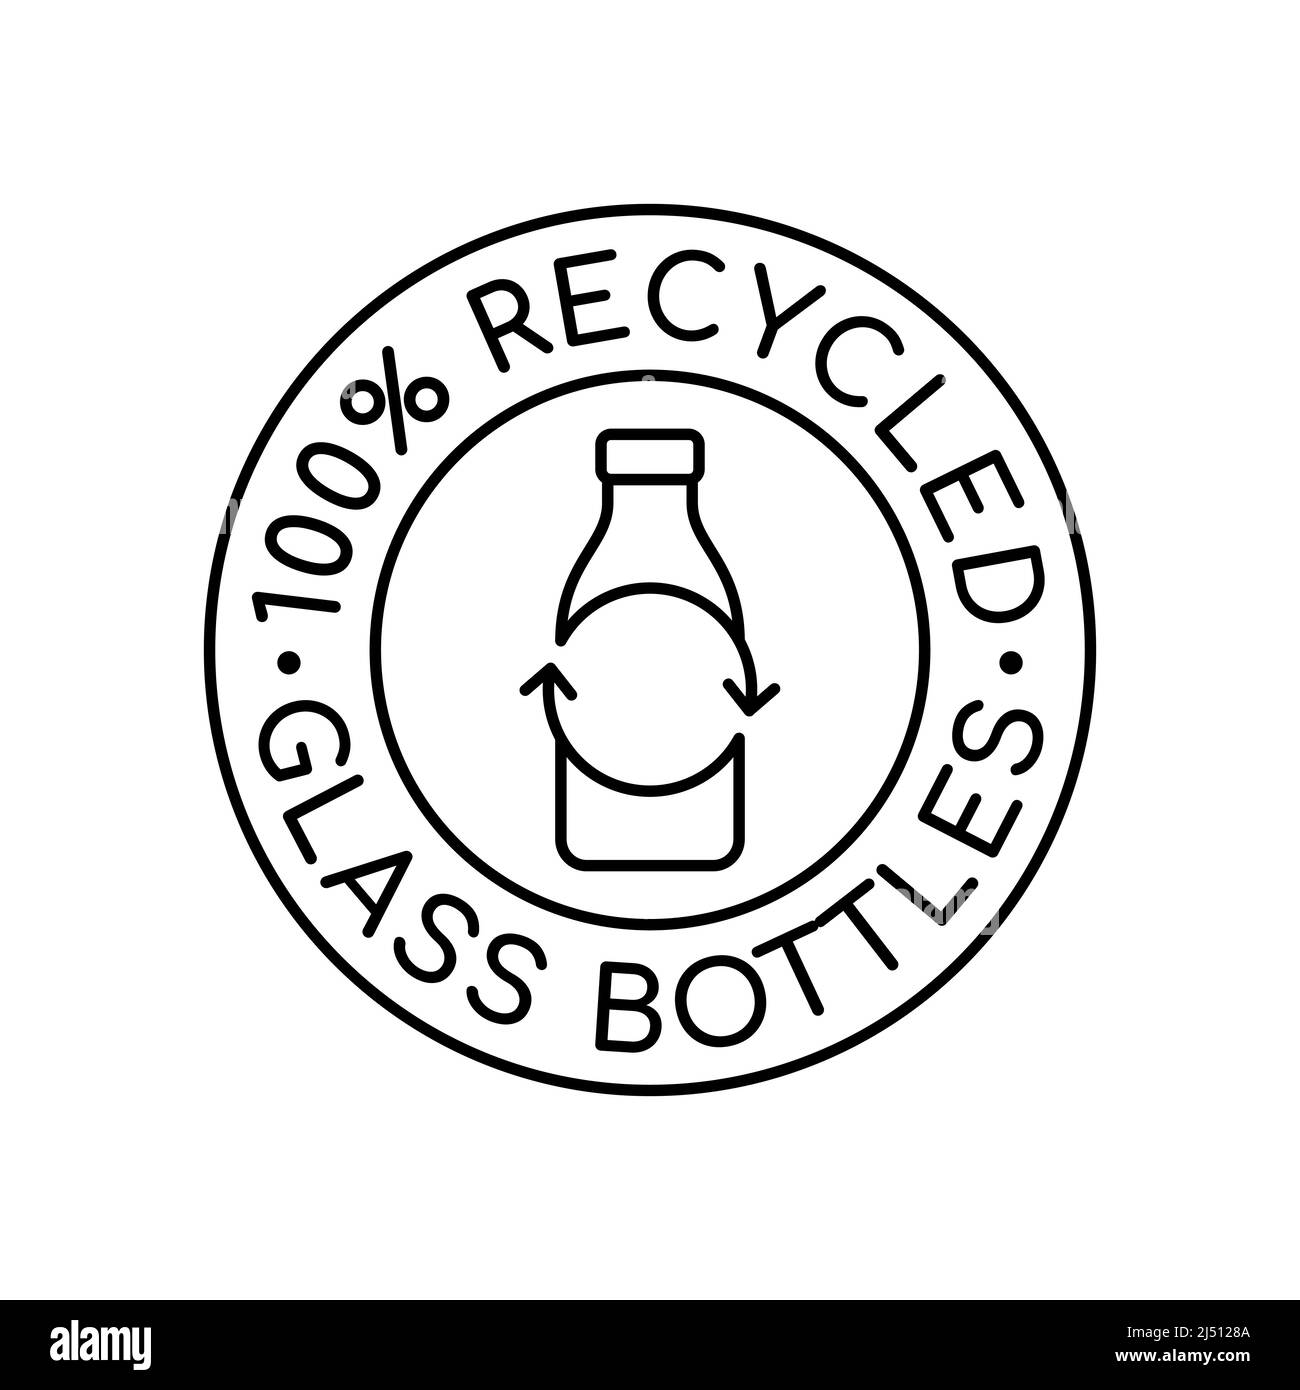 100% recycled glass bottles sign. Glass bottle in a circle with recycle arrows. Bottle bank concept. Reduce, reuse, recycle. Recycling material vector Stock Vector